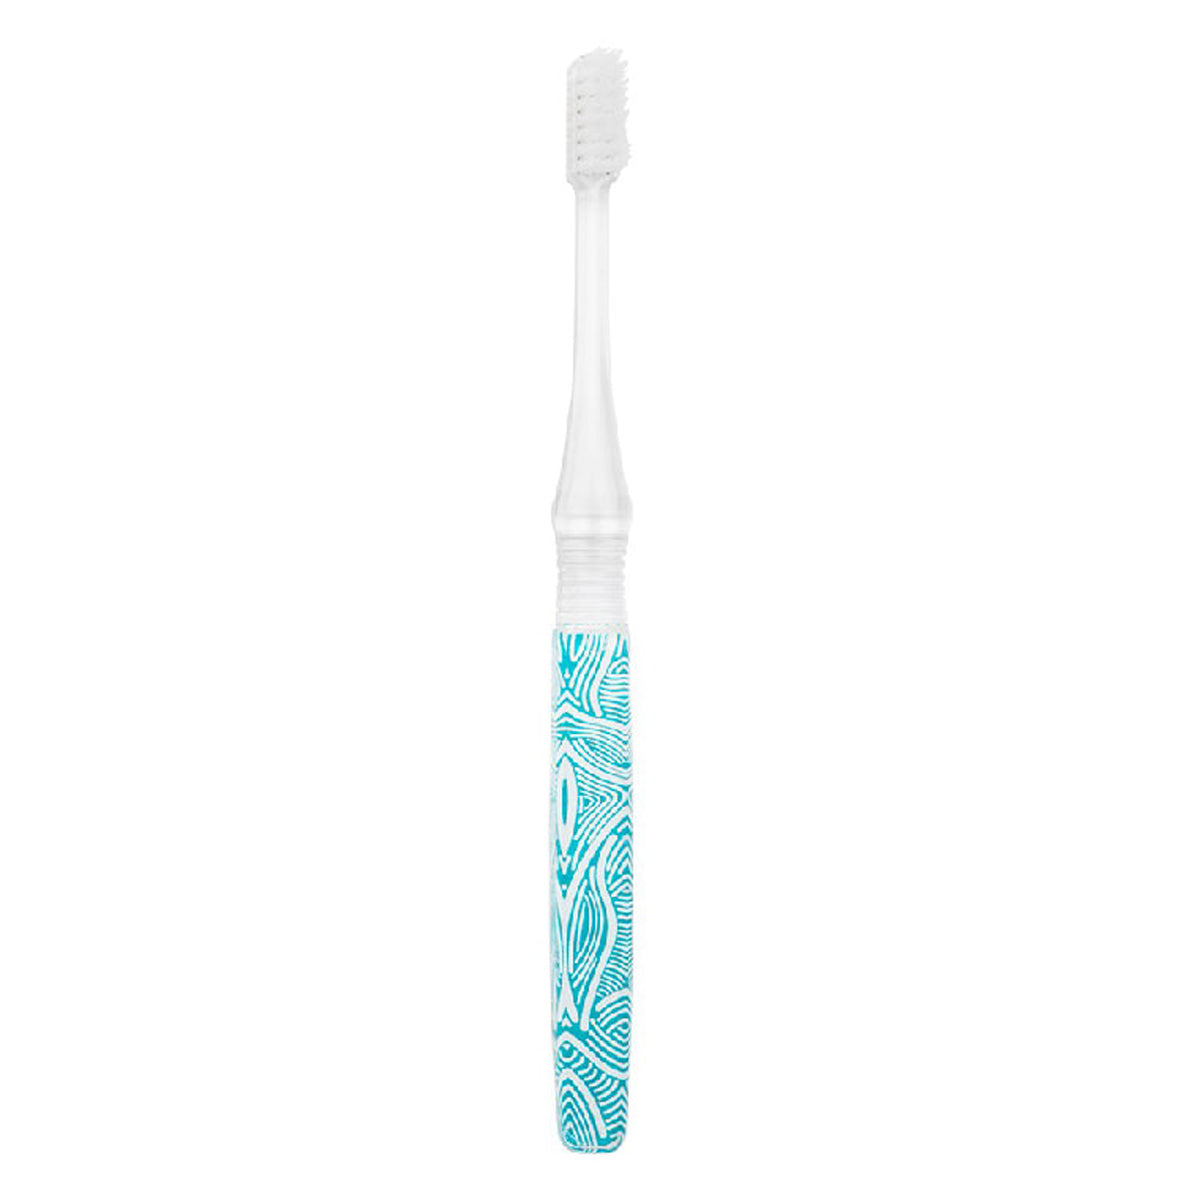 Primary image of TL 8 Toothbrush